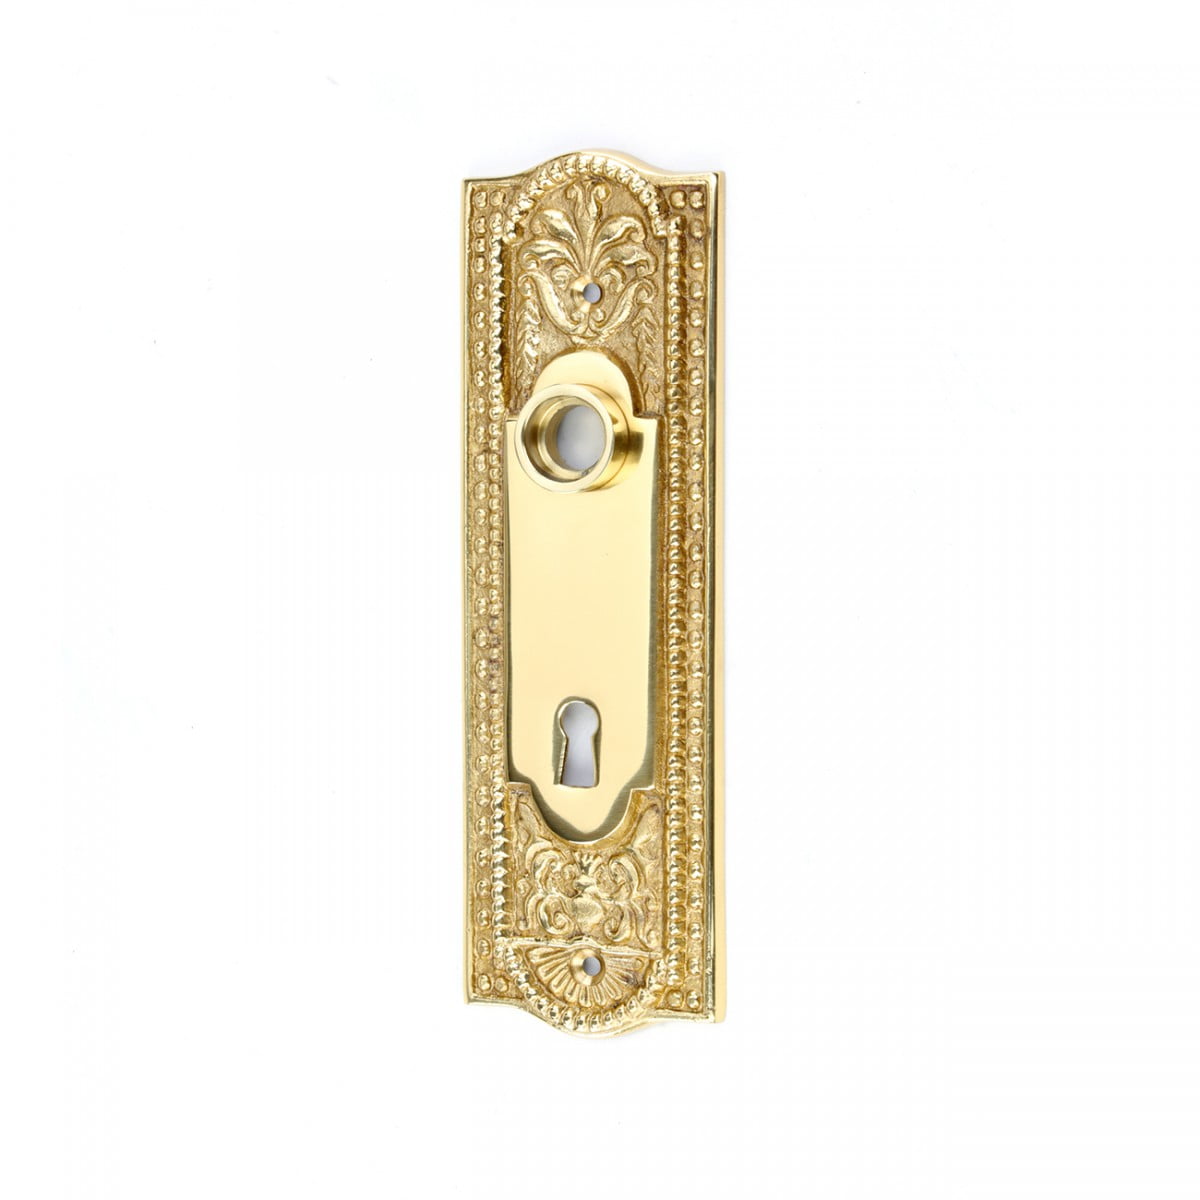 Solid Brass Escutcheon 1 1/4" Brass Fixings Included High Quality 